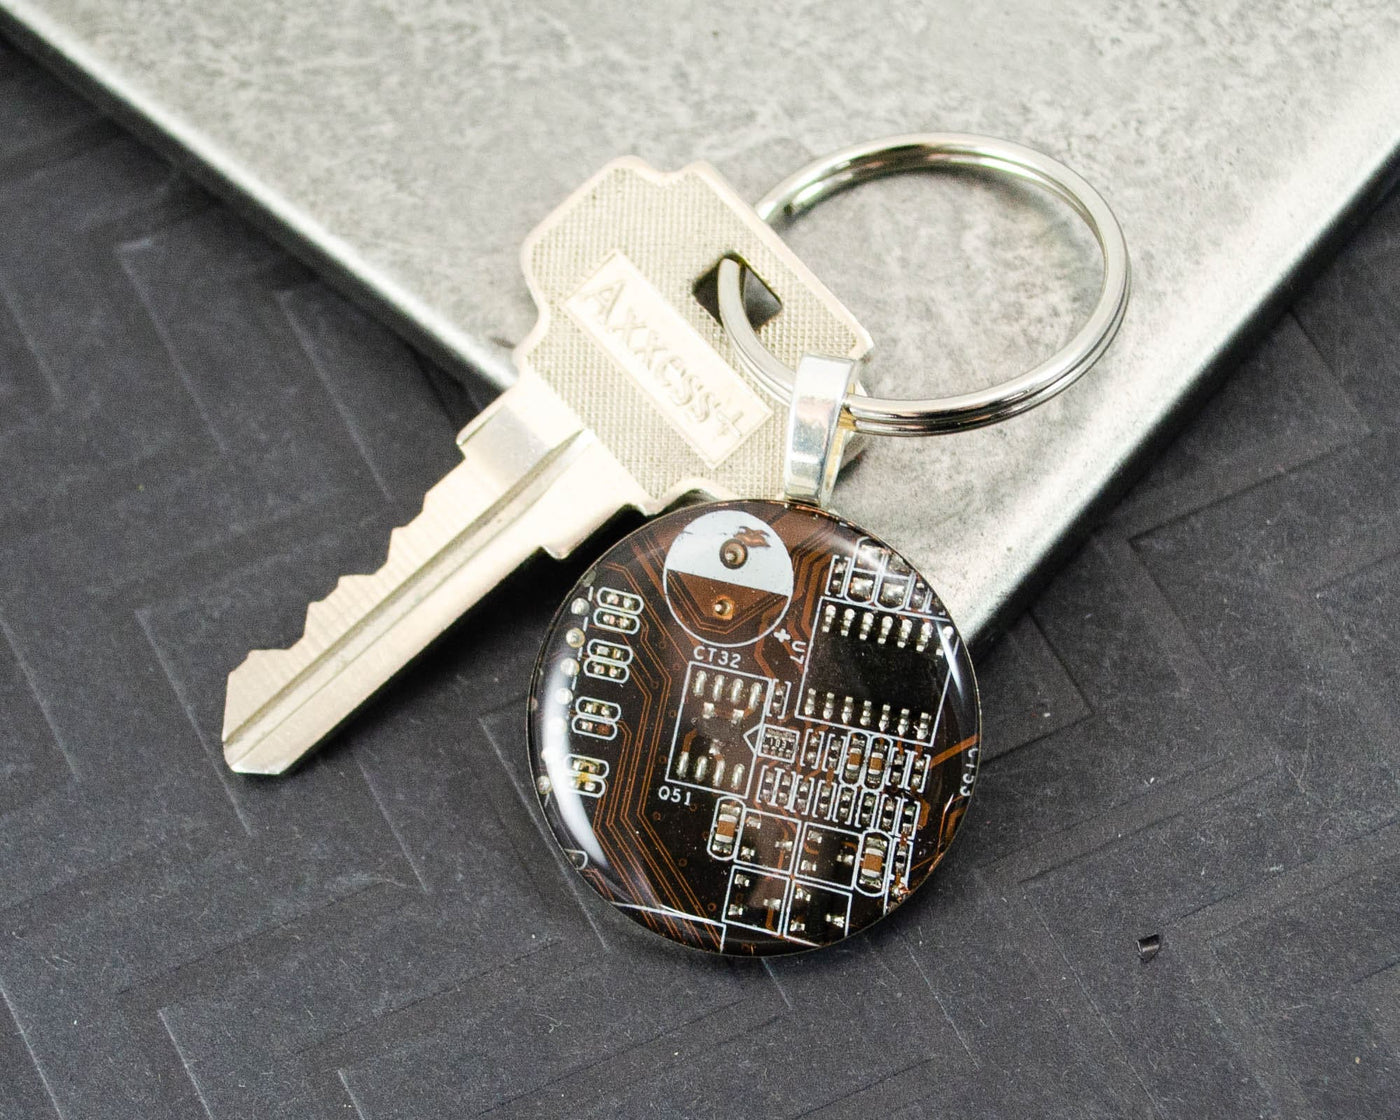 Circuit Board Keychain, Computer Engineer Gift, Fathers Day Gift, Wearable Technology, Information Tech, Black Key Fob, Geek Gift for Him